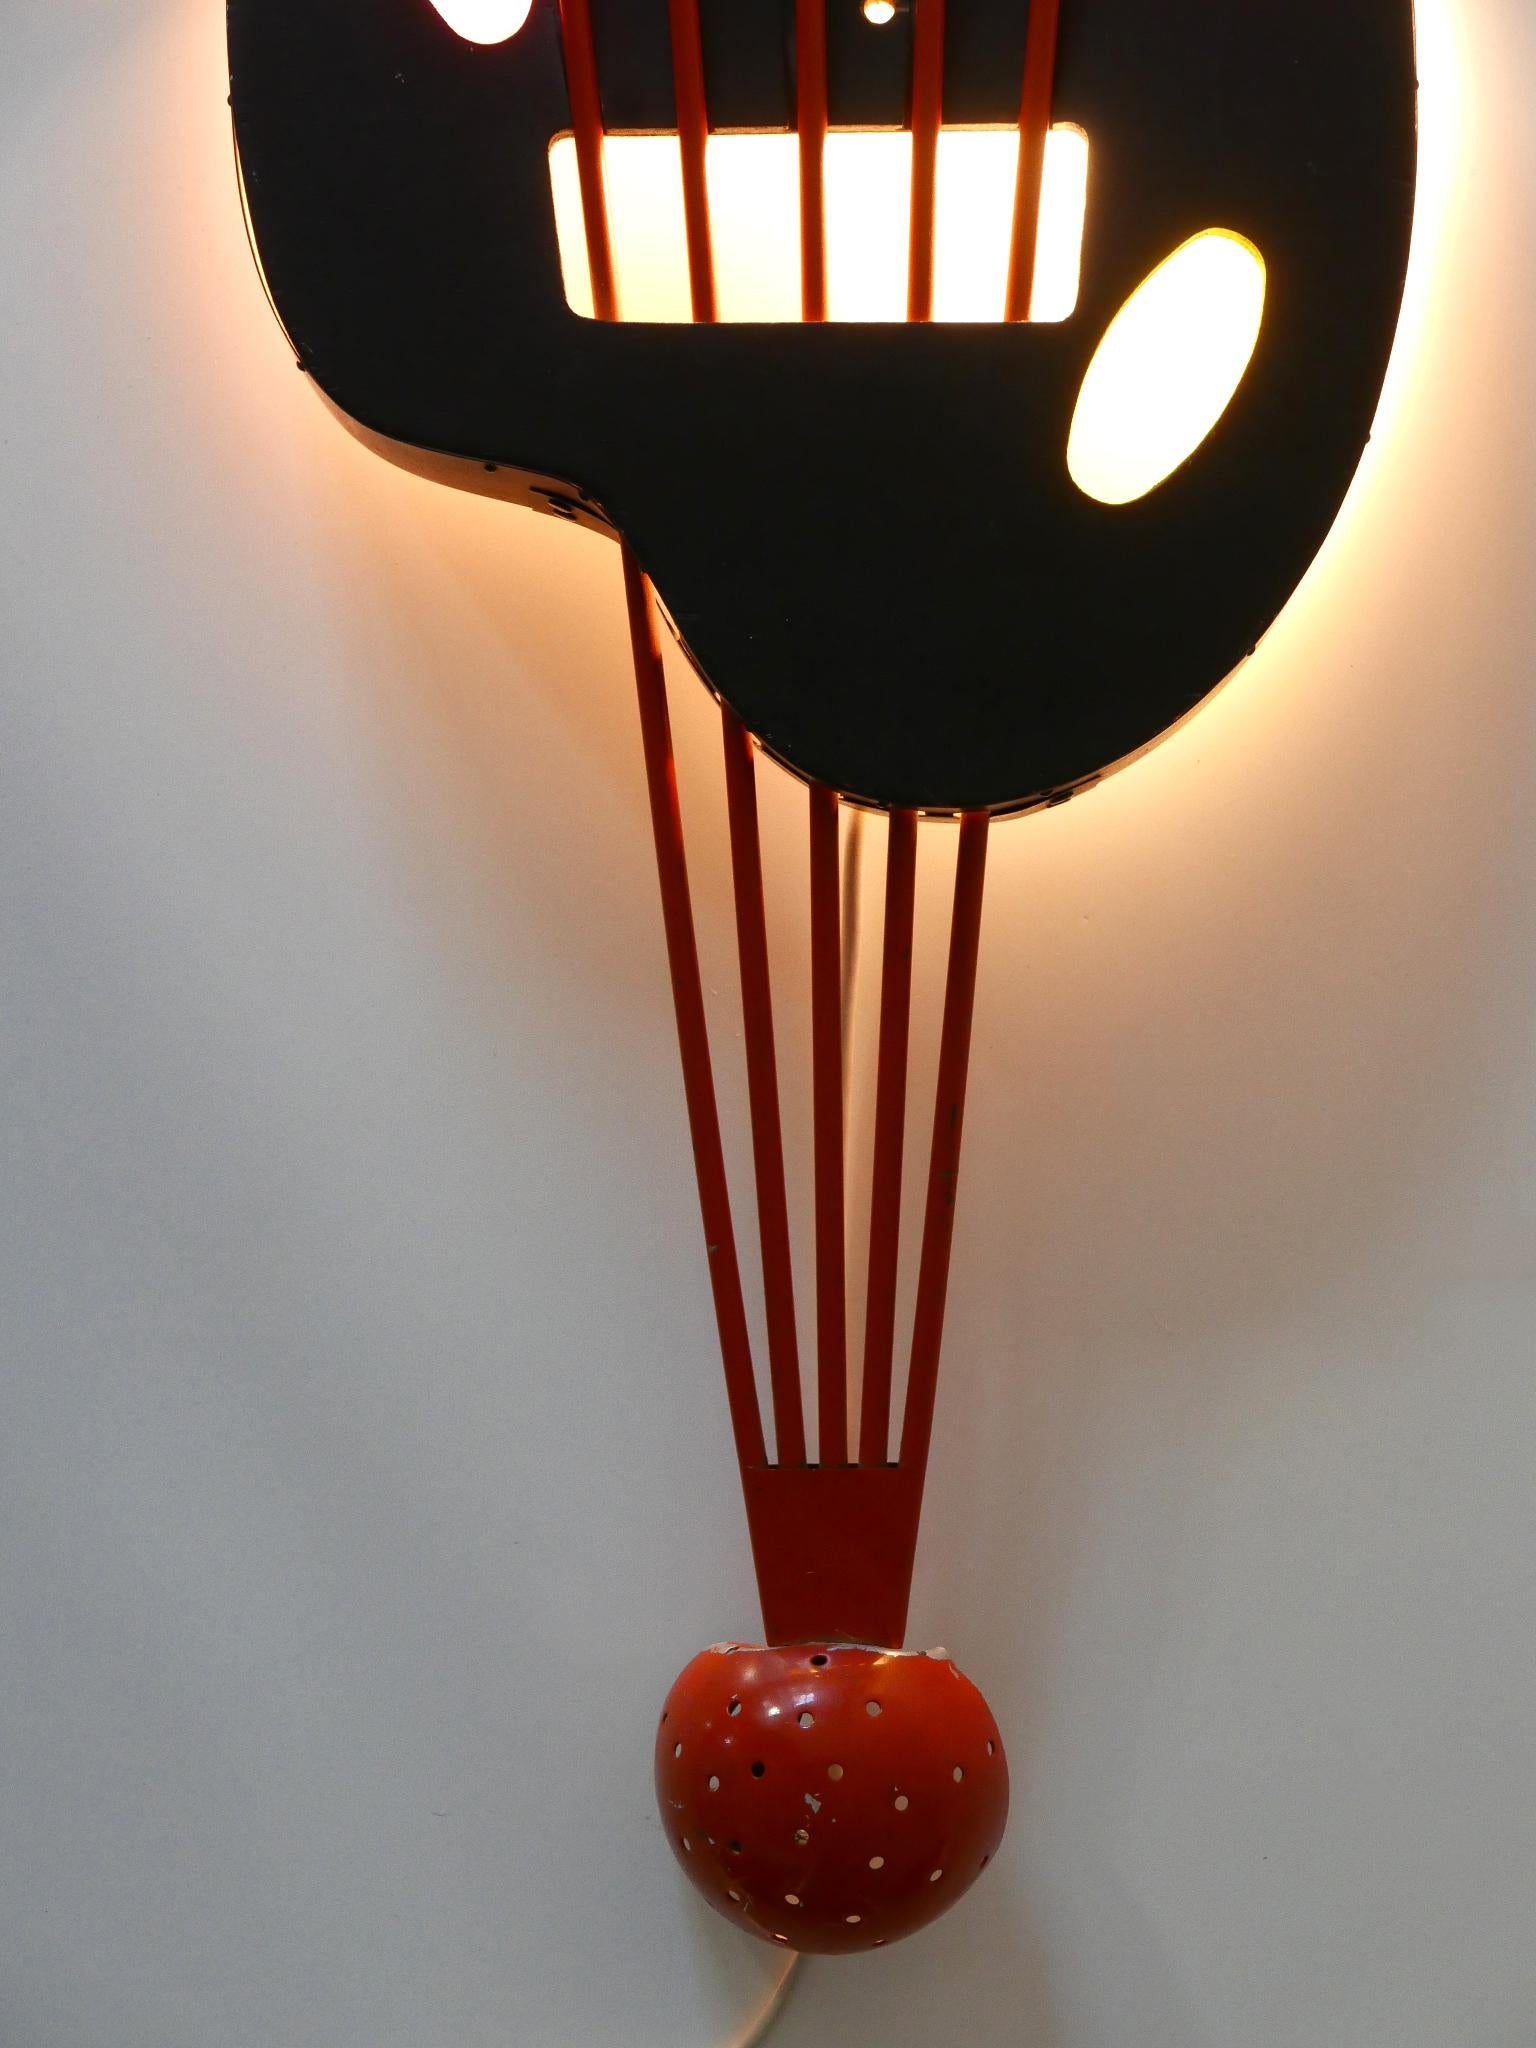 Unique Mid-Century Modern Wall Fixture or Light Object 'Painting Board', 1950s For Sale 3